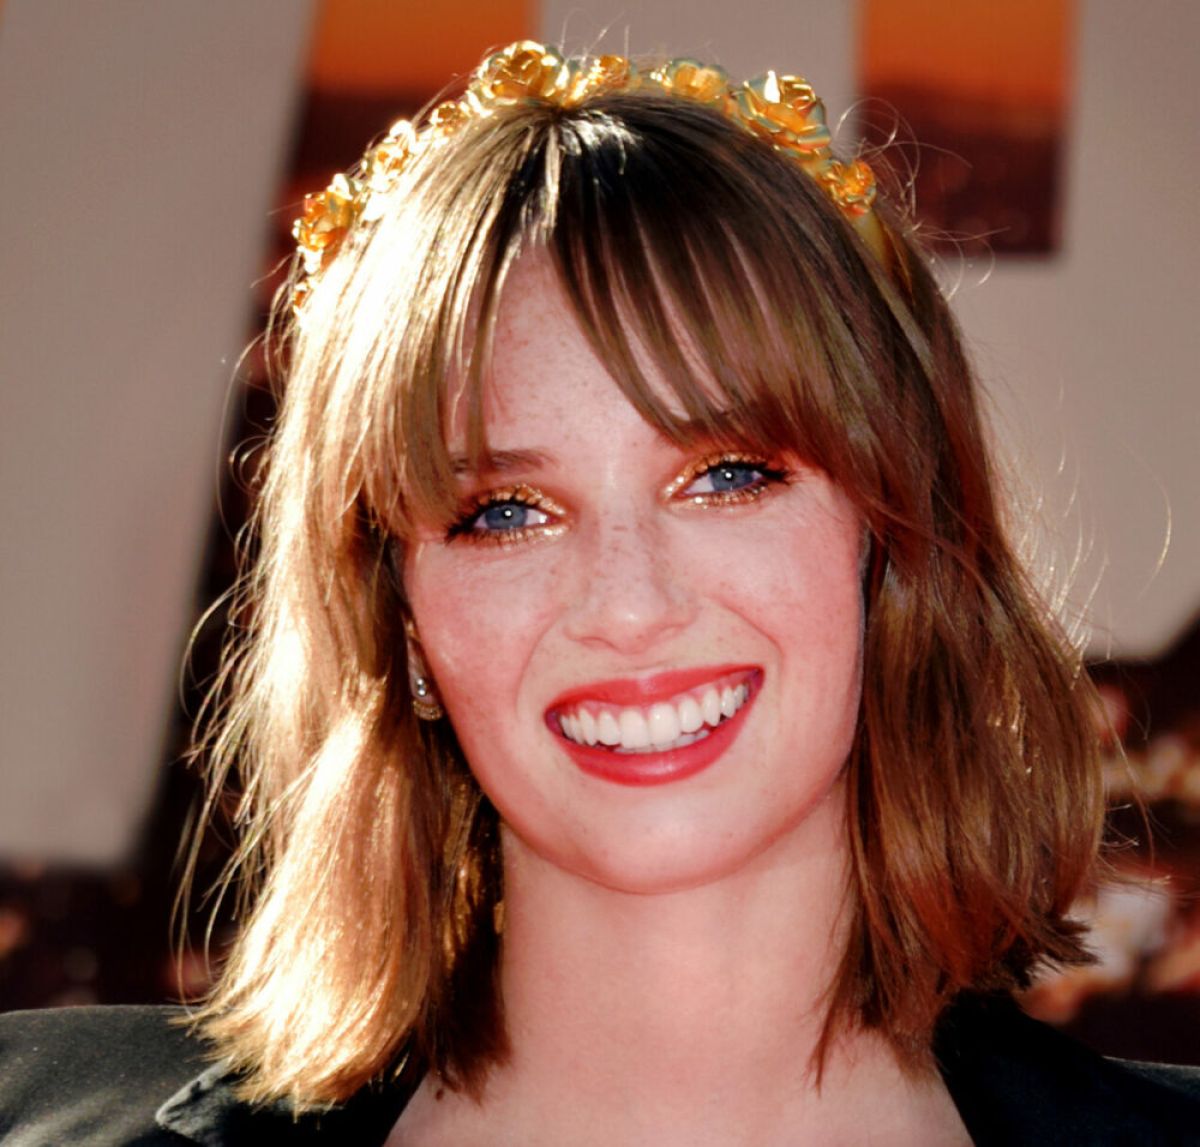 ‘Sweet Tooth’- The new single from Maya Hawke